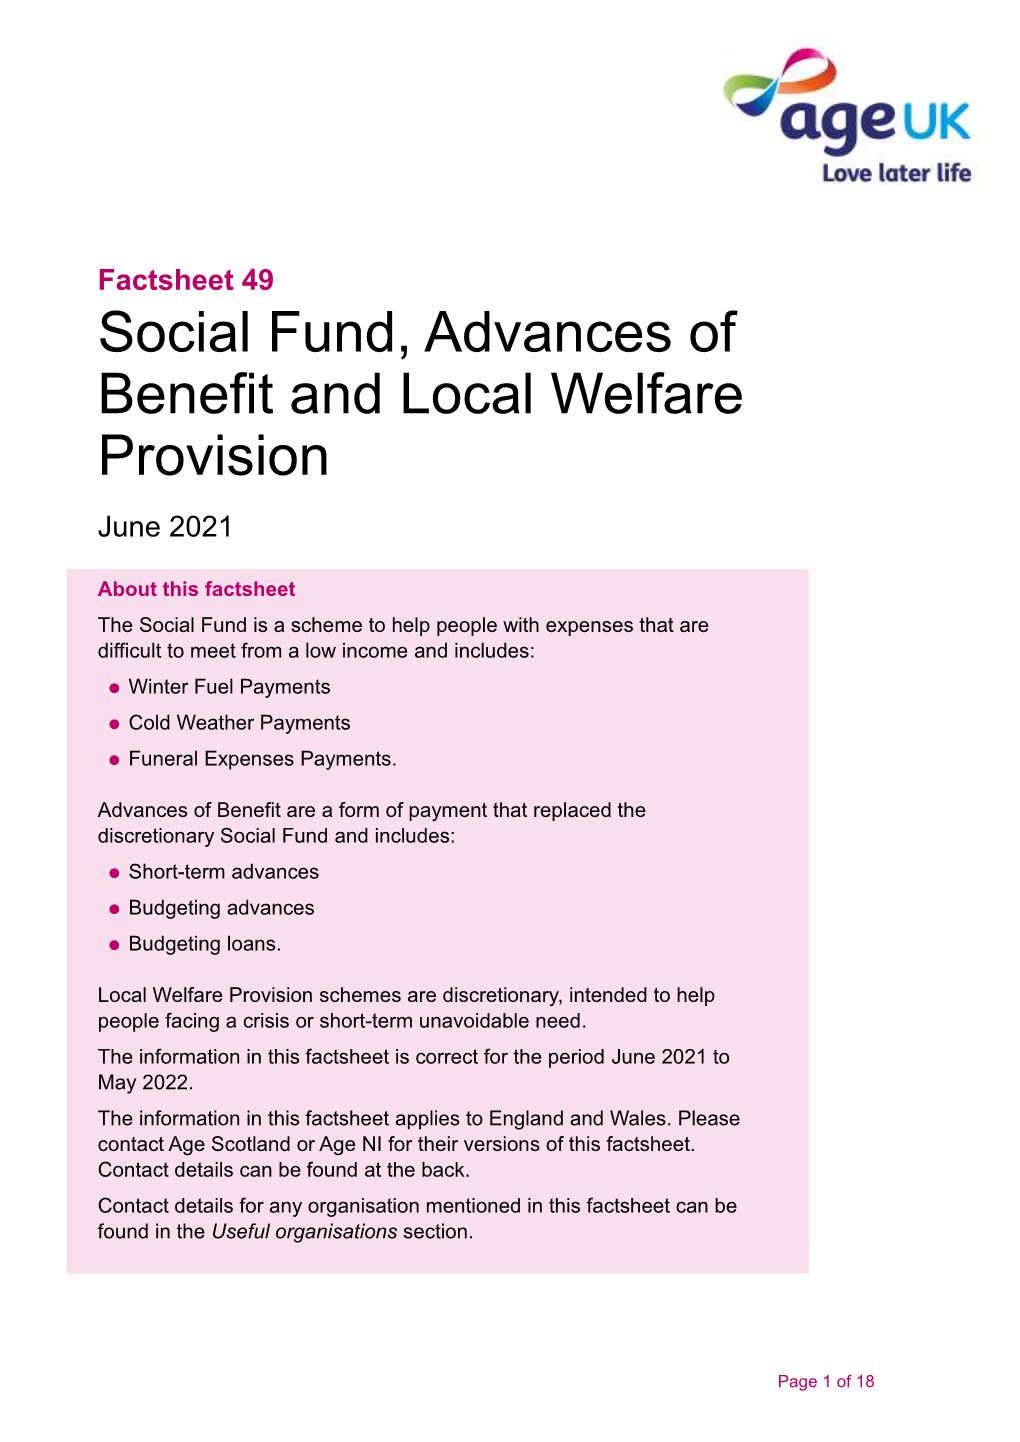 Social Fund, Advances of Benefit and Local Welfare Provision June 2021